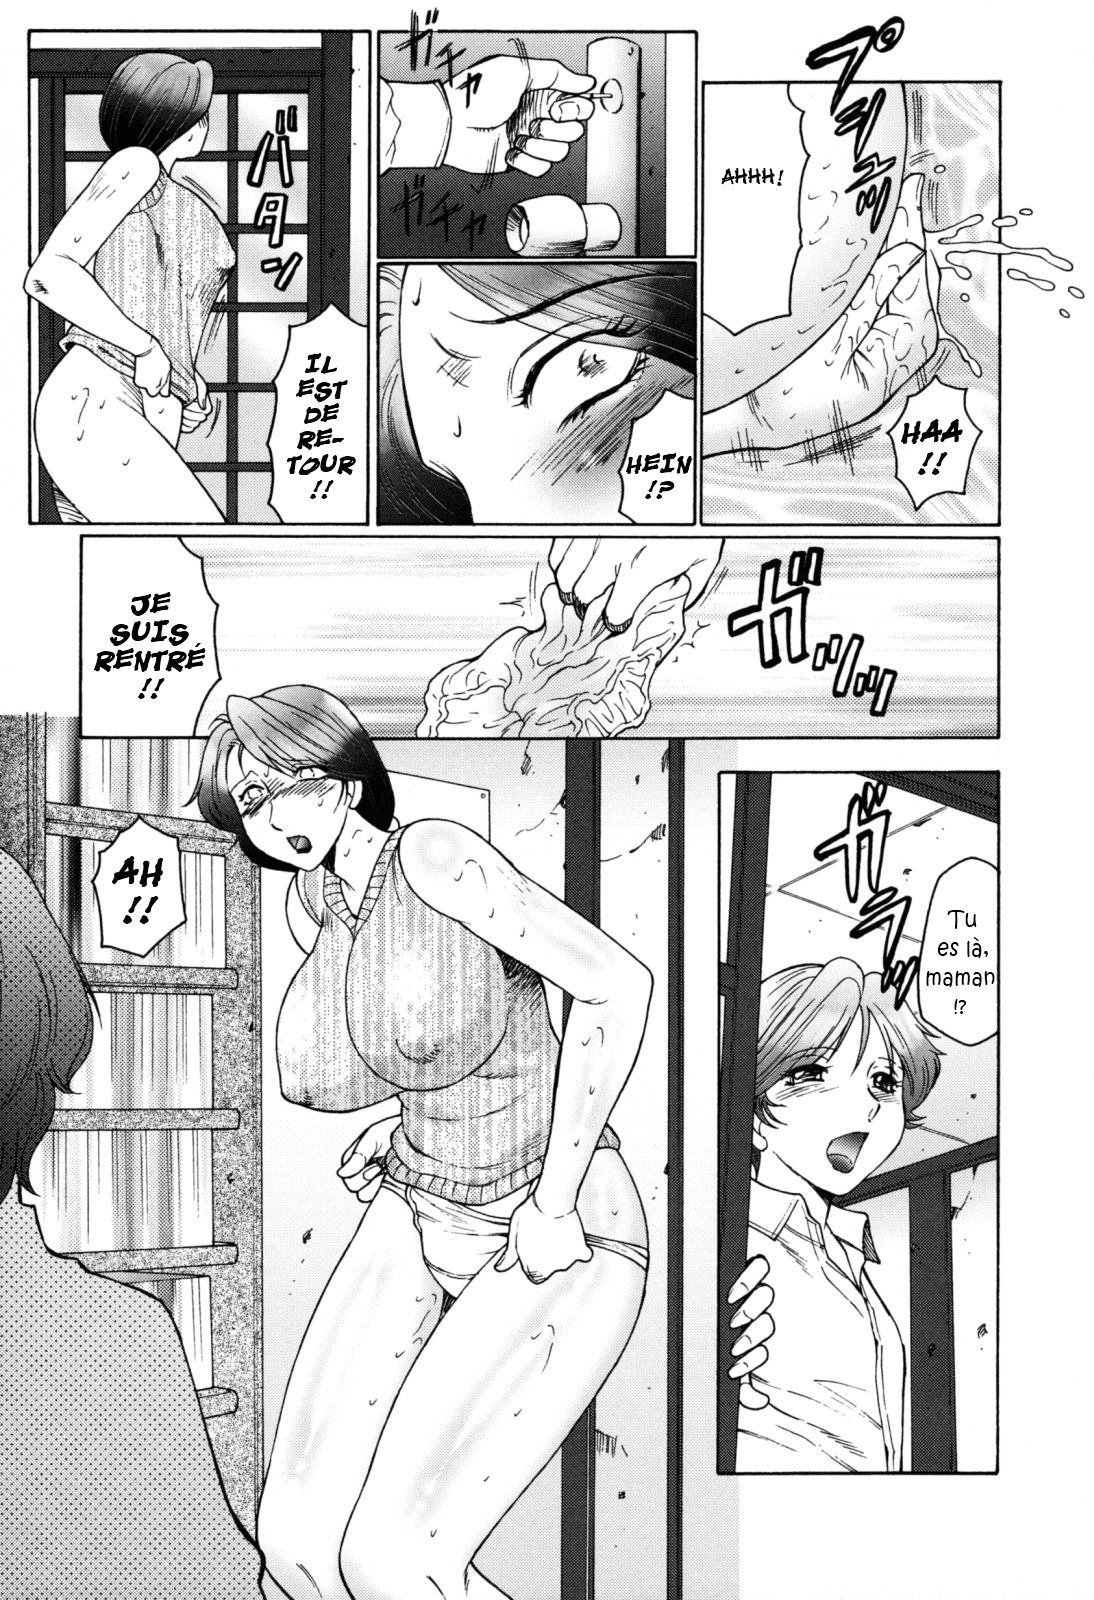 Boshino Toriko - The Captive of Mother and the Son Ch. 1-5 numero d'image 40